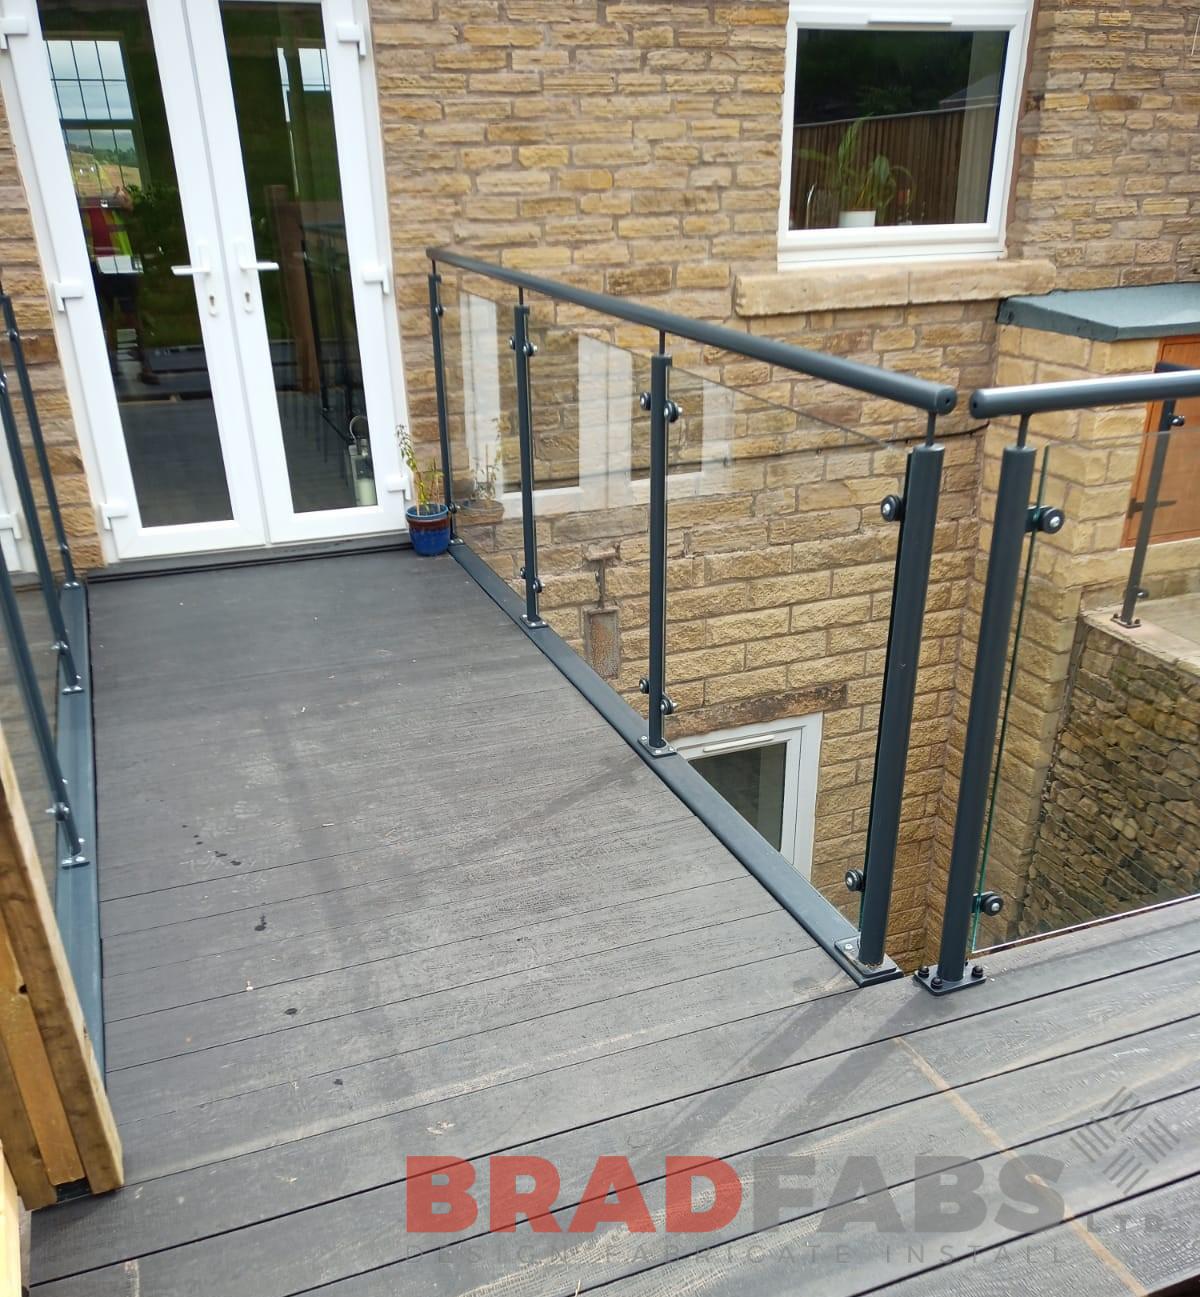 bespoke bridge, with mild steel, galvanised and powder coated balustrade with glass infill panels, complete with composite decking by bradfabs 